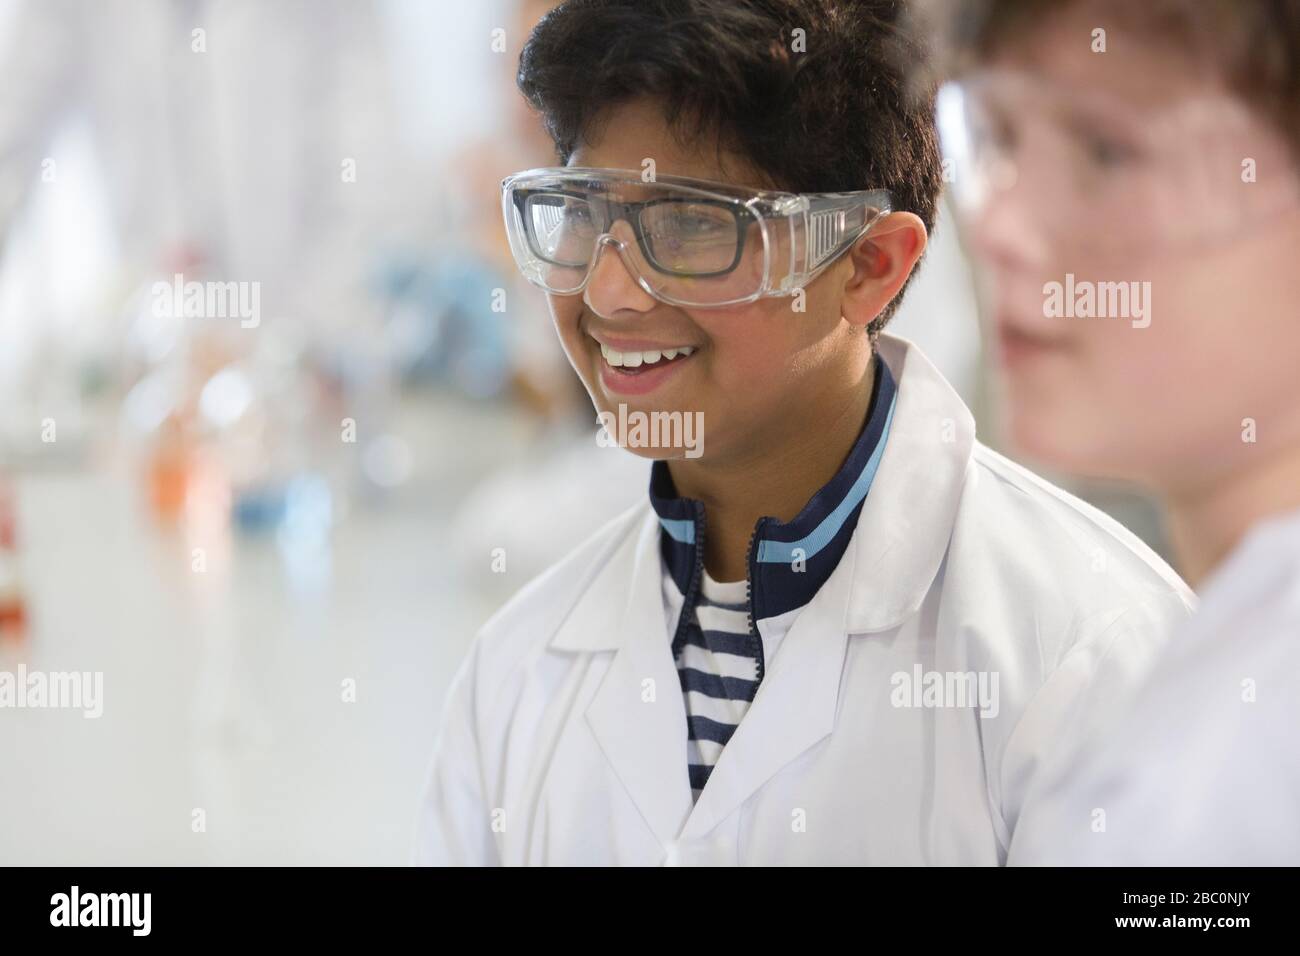 Smiling boy wearing goggles and lab coat in laboratory classroom Stock Photo